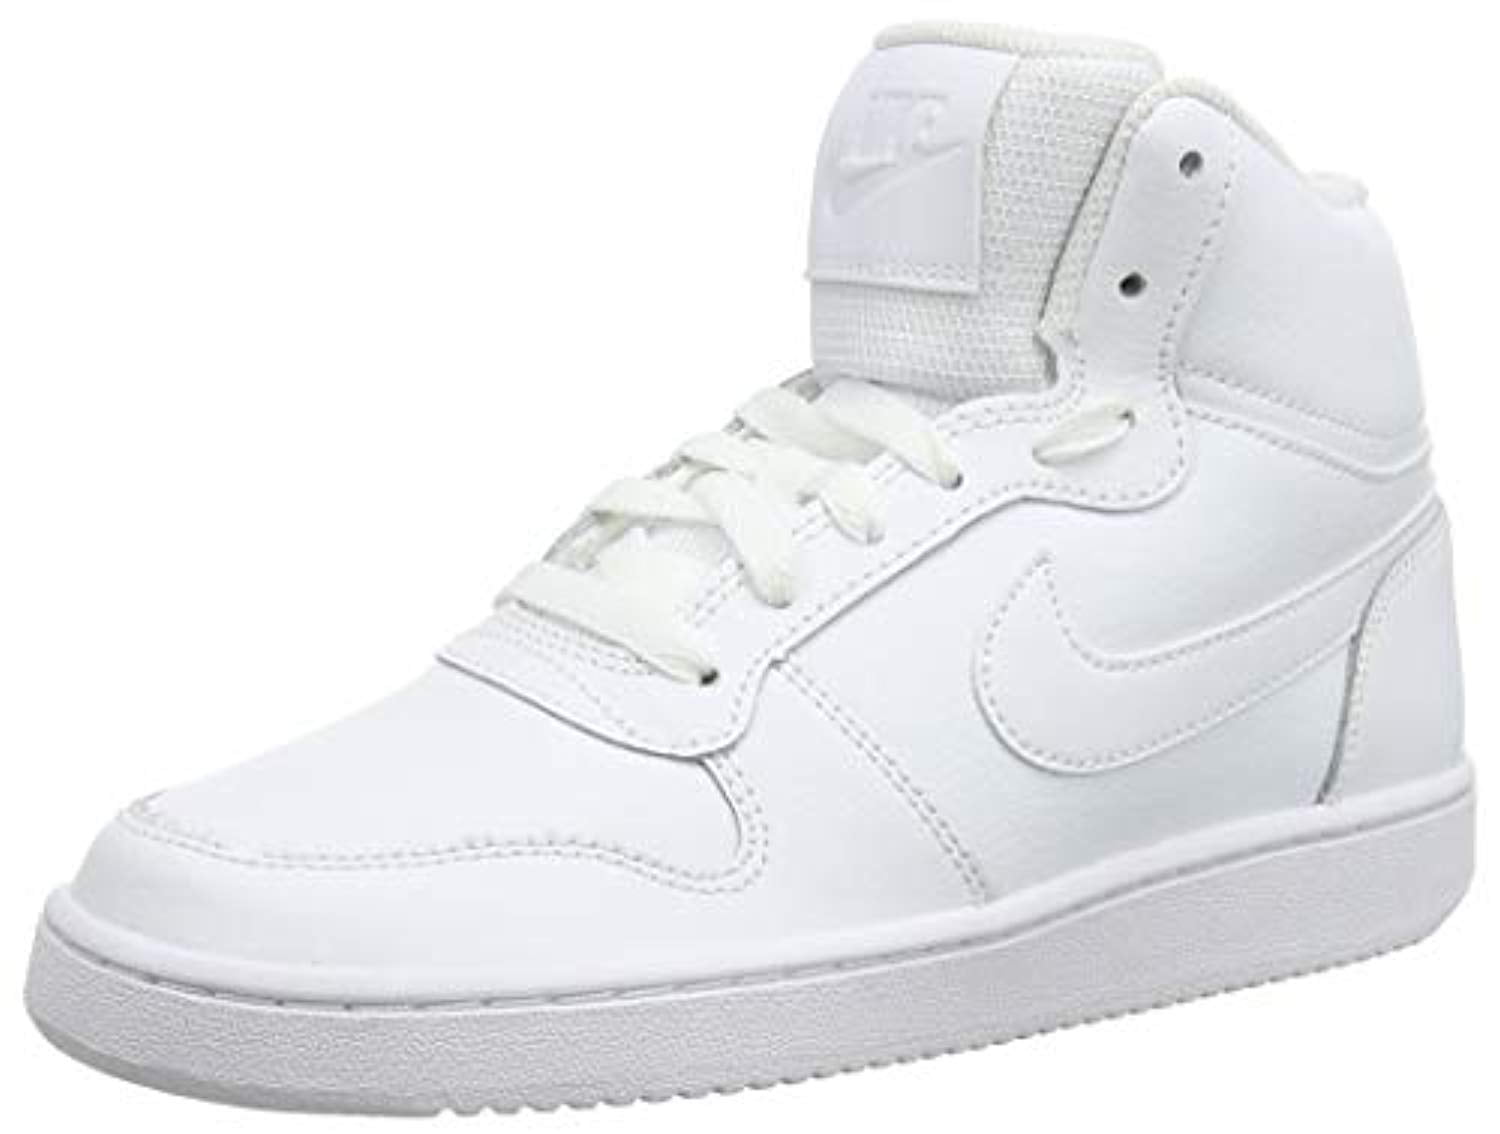 Nike Ebernon Mid AQ1778-100 Women's White Leather Running Shoes Size US ...